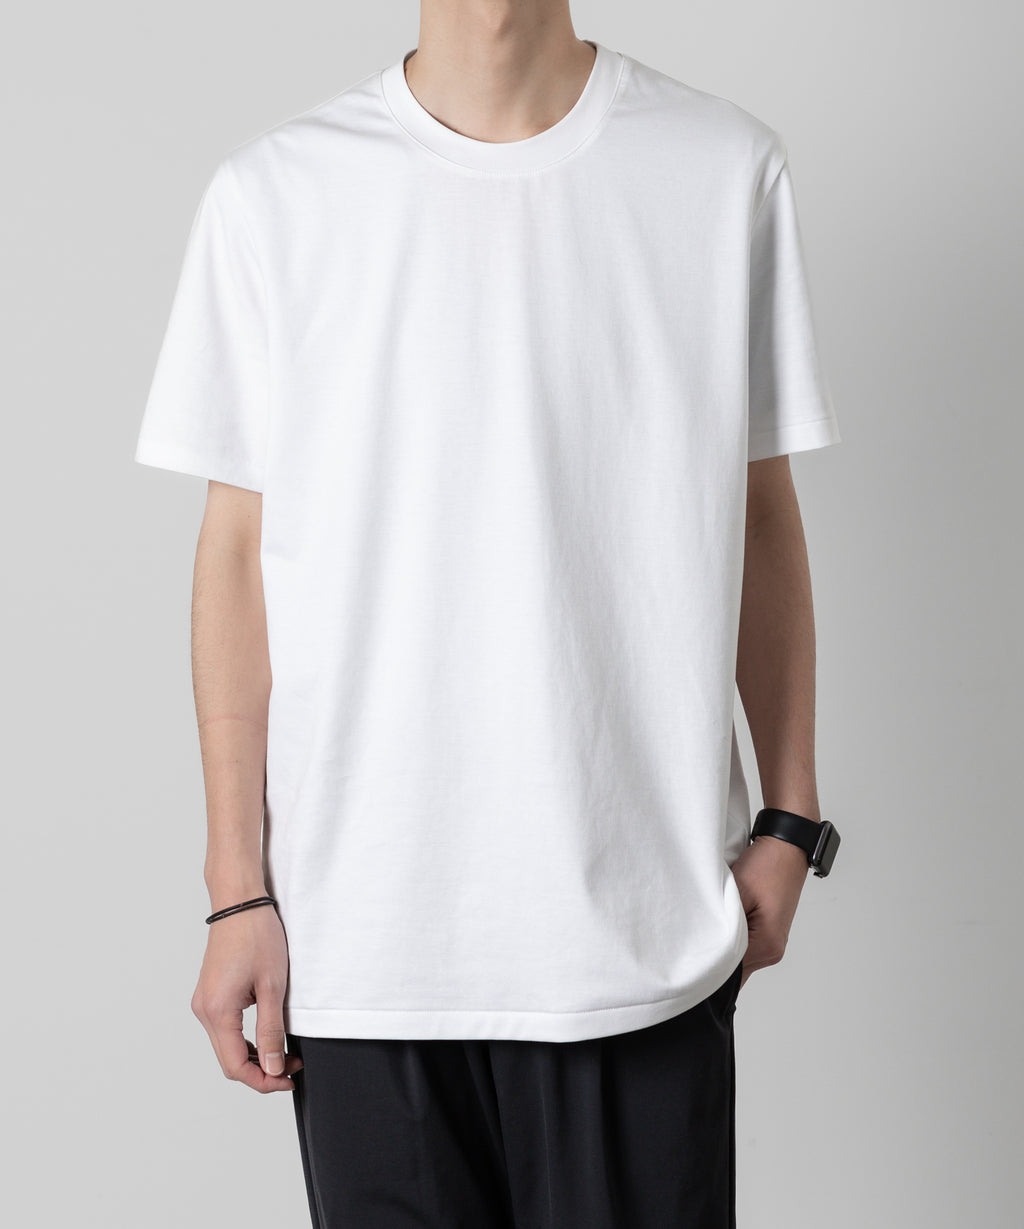 【ATTACHMENT】ATTACHMENT アタッチメントのCOTTON DOUBLE FACE SLIM FIT S/S TEE - WHITE 公式通販サイトsession福岡セレクトショップ